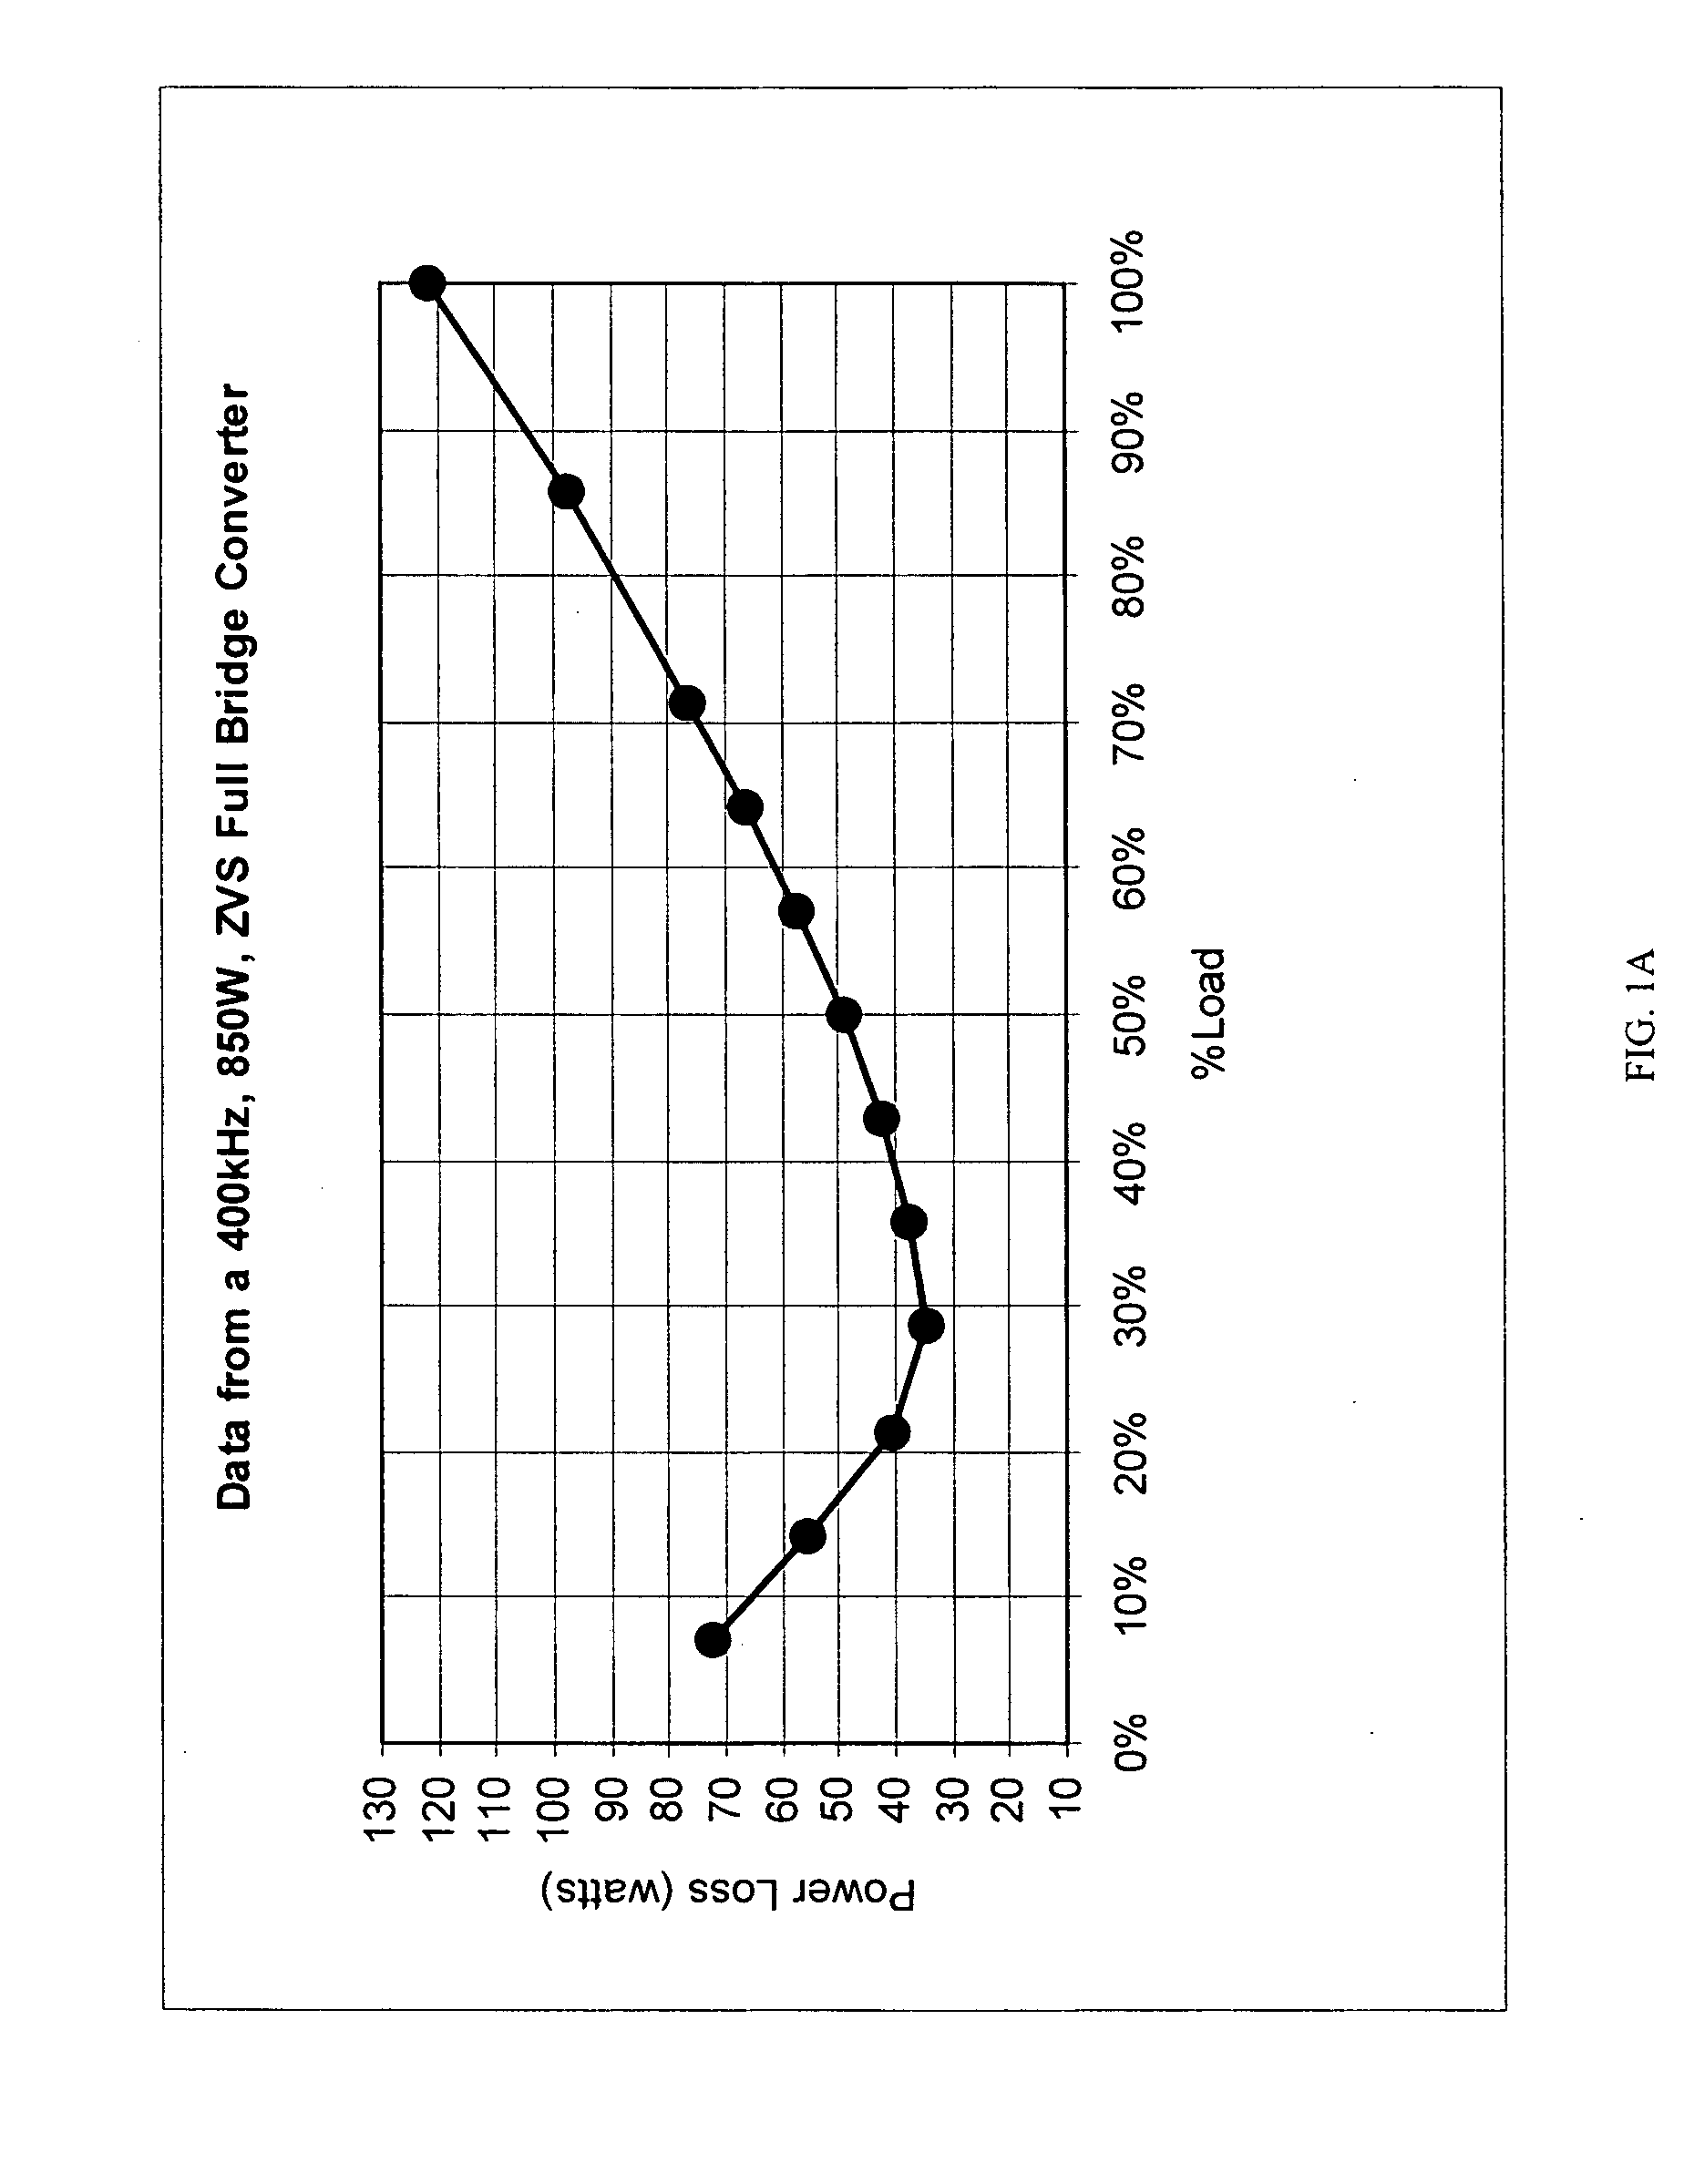 Circuit for reducing losses at light load in a soft switching full bridge converter